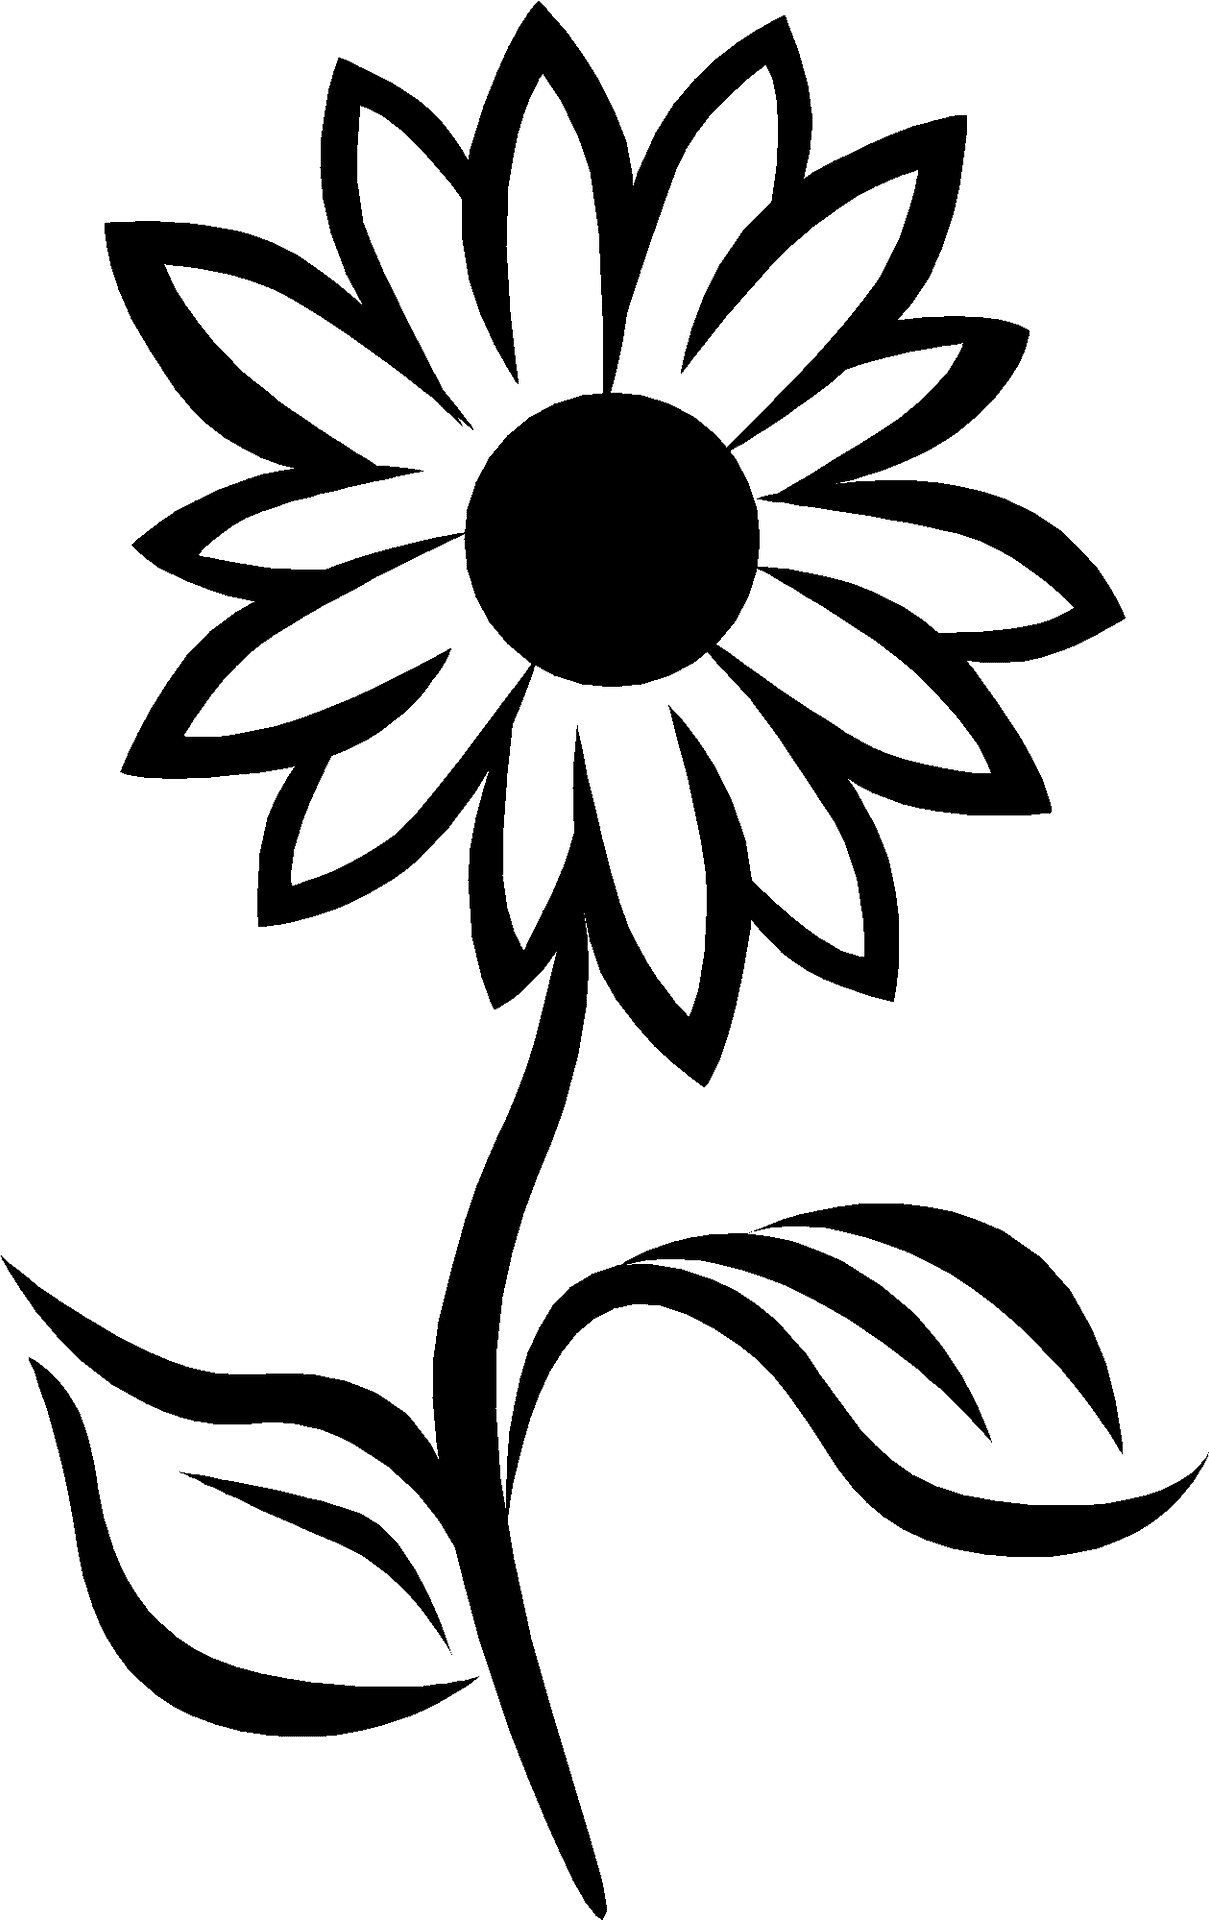 Stylized Blackand White Flower PNG image